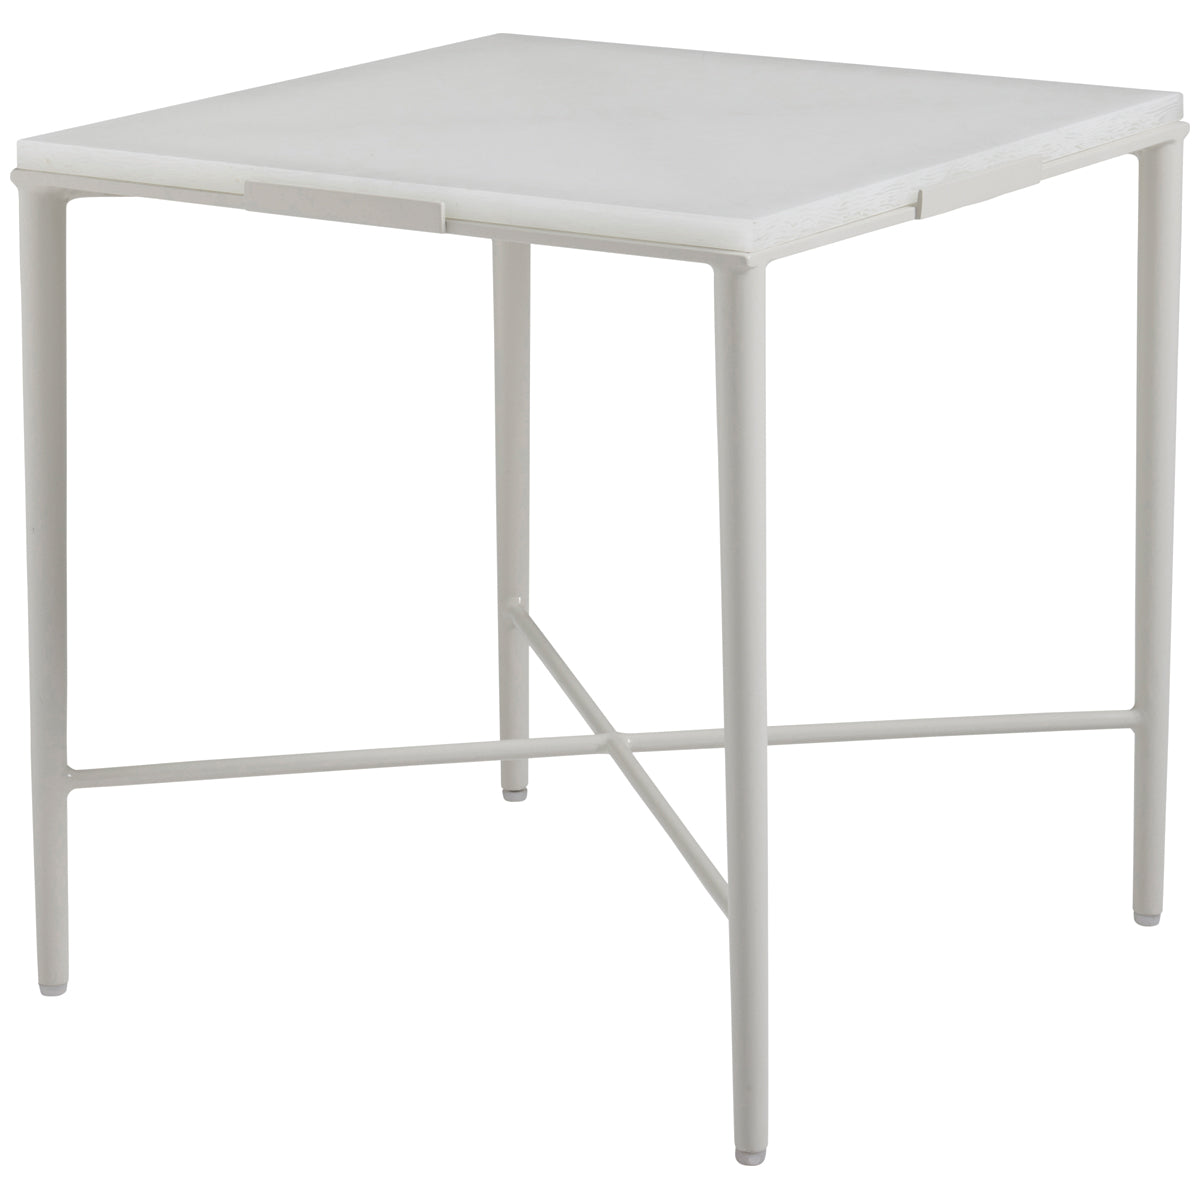 Tommy Bahama Seabrook Outdoor End Table